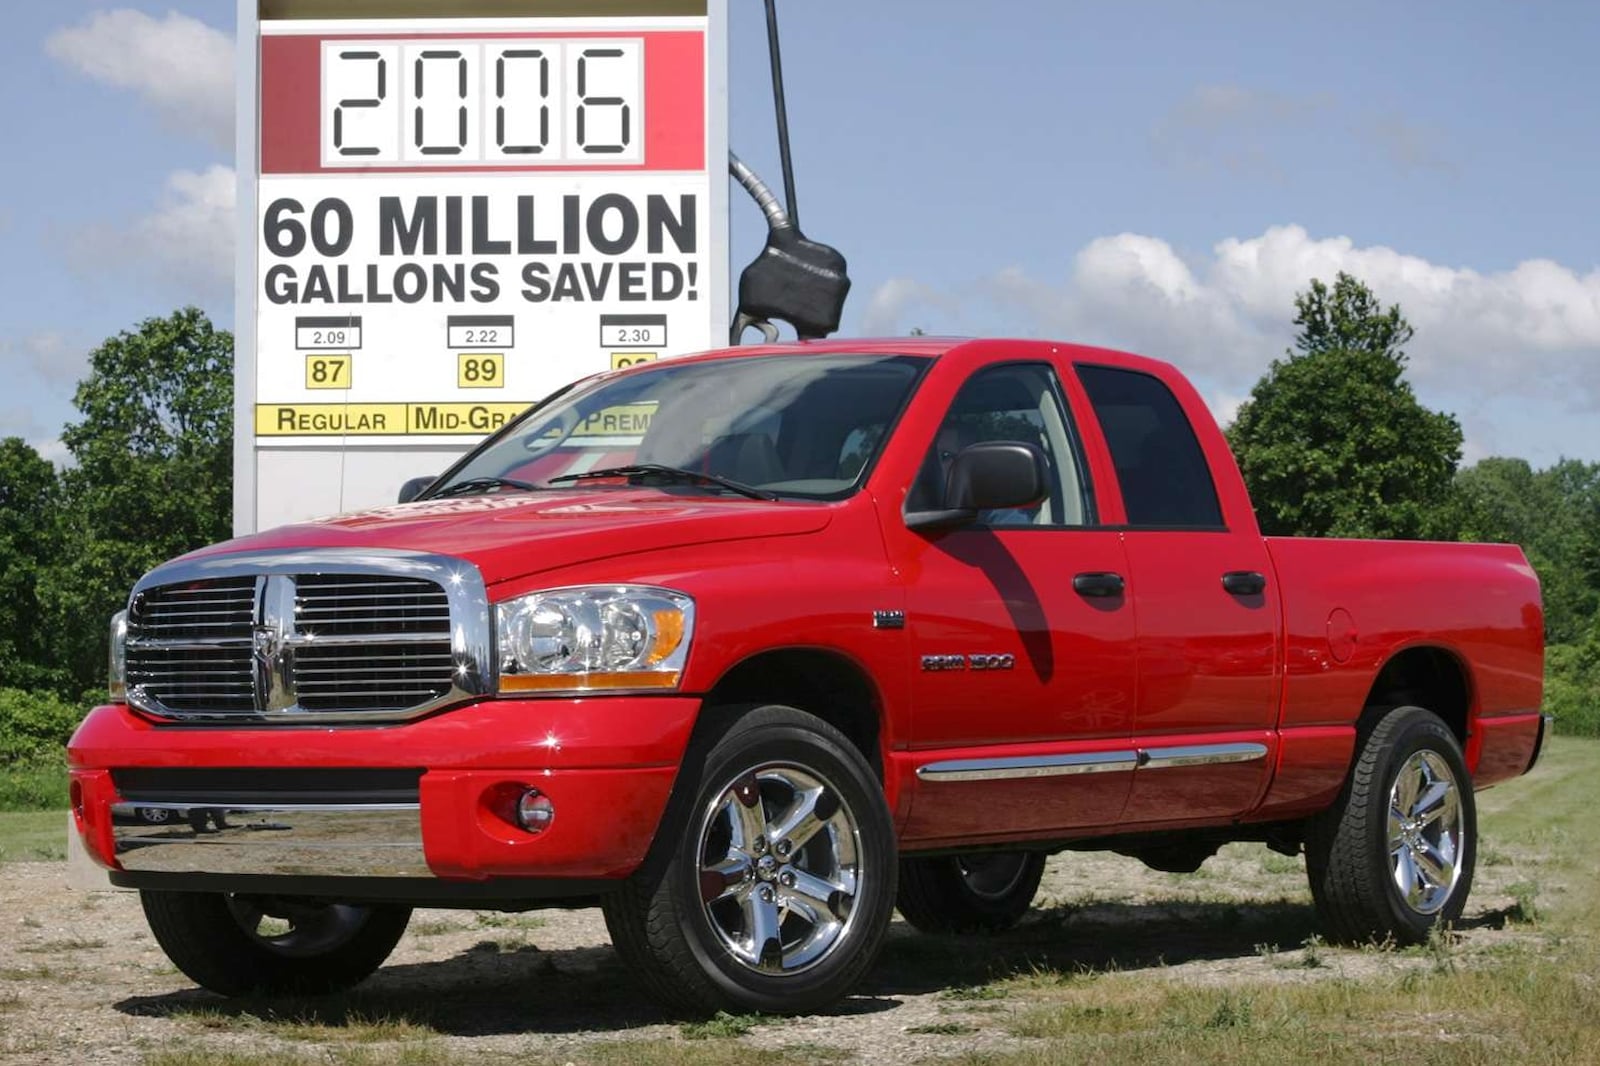 End Of An Era: Ram 1500 Pickup Truck No Longer Comes With A V8